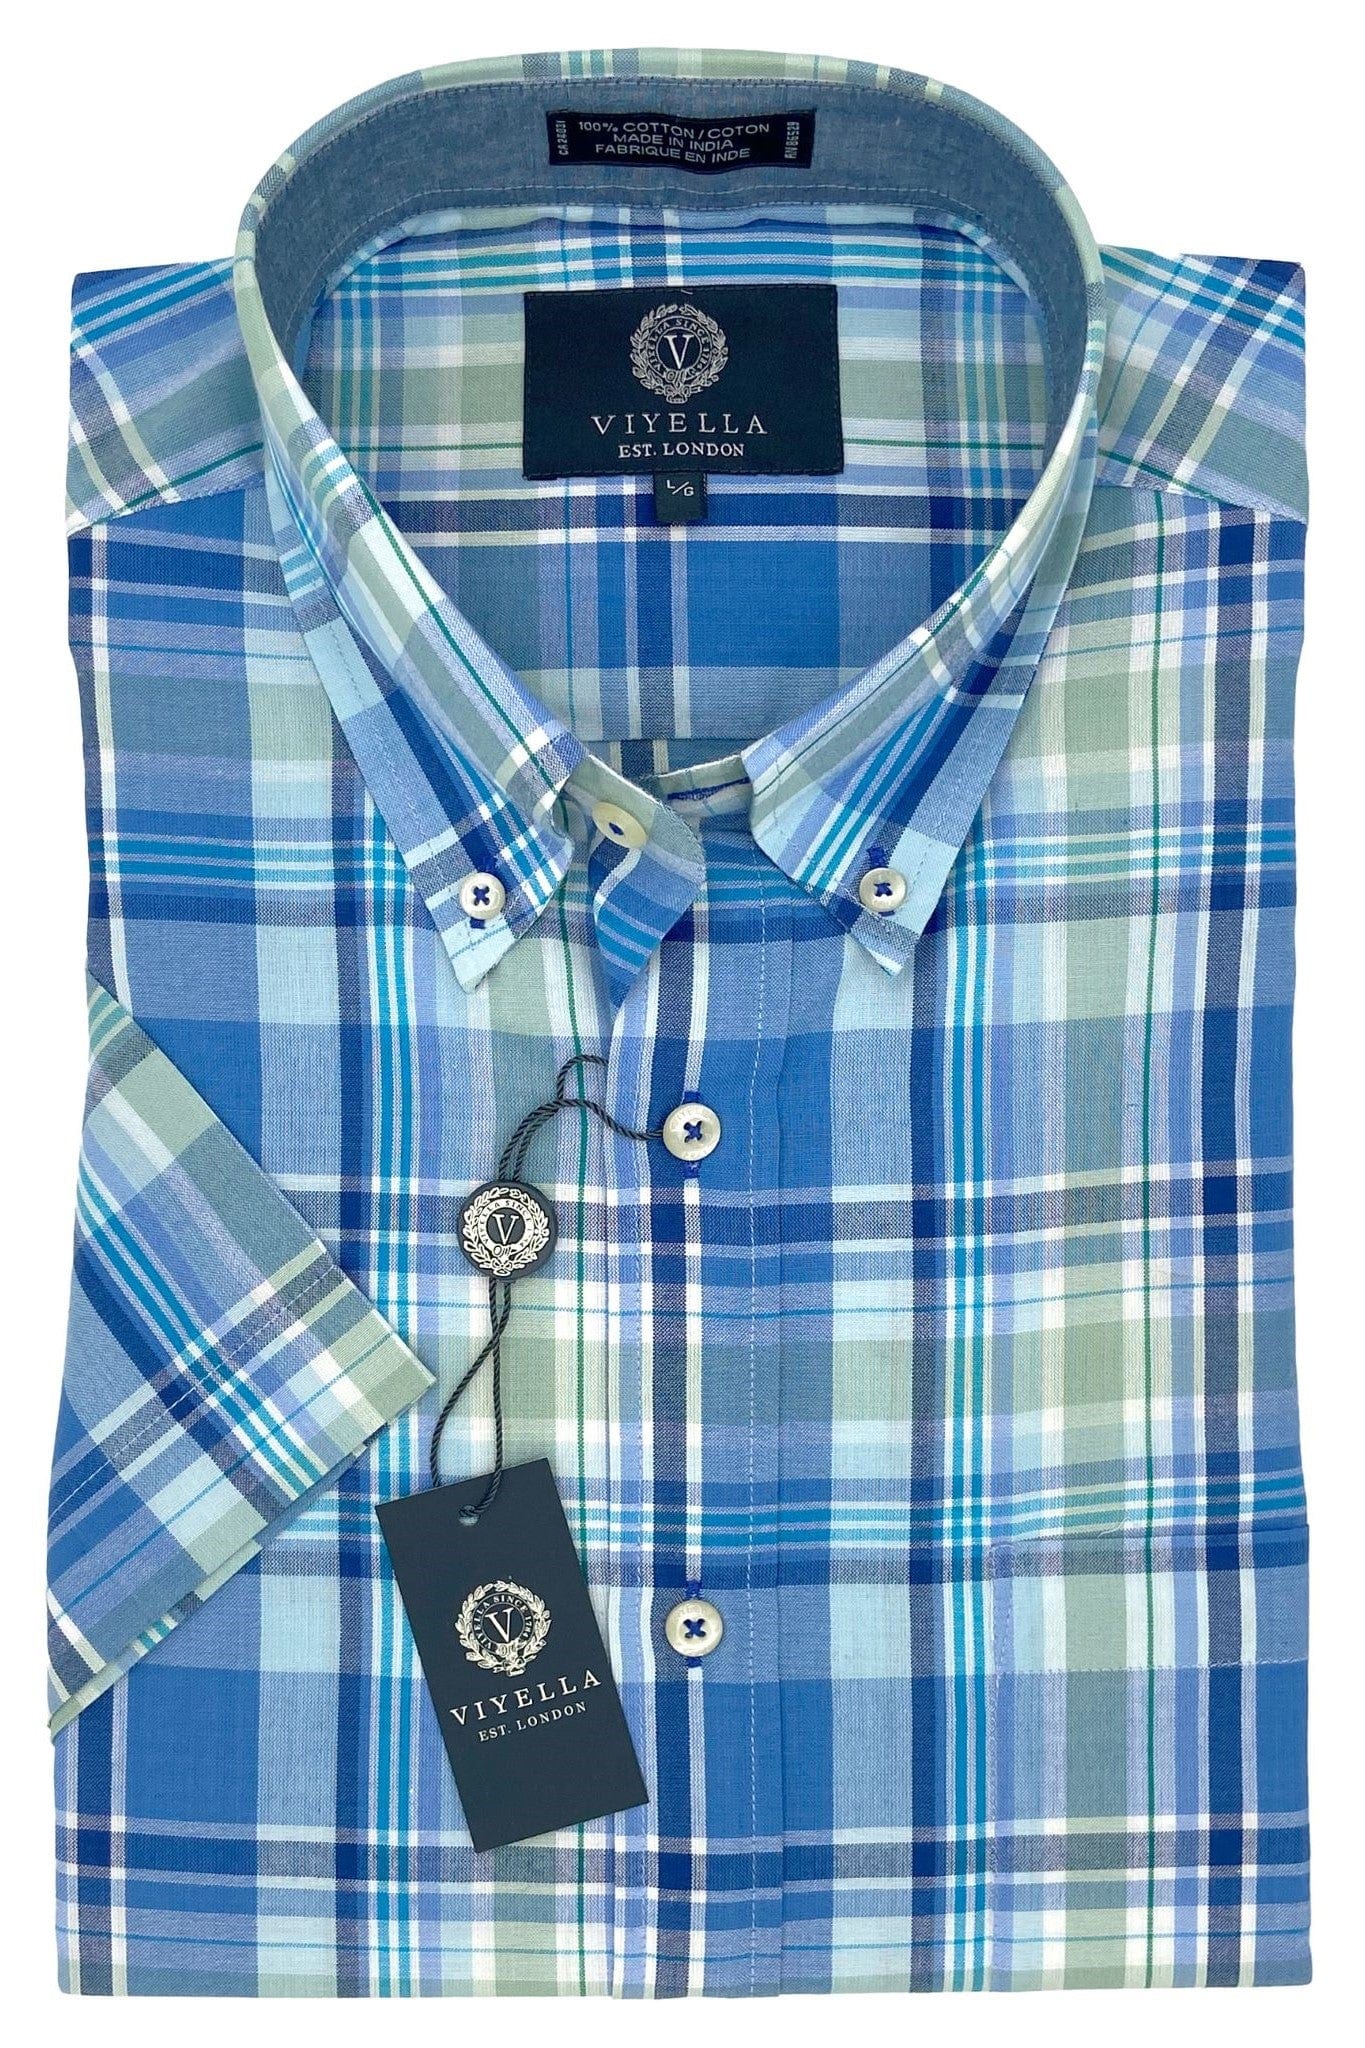 Viyella Expertly Crafted Chambray Plaid Madras Shirts The Abbey's Finest